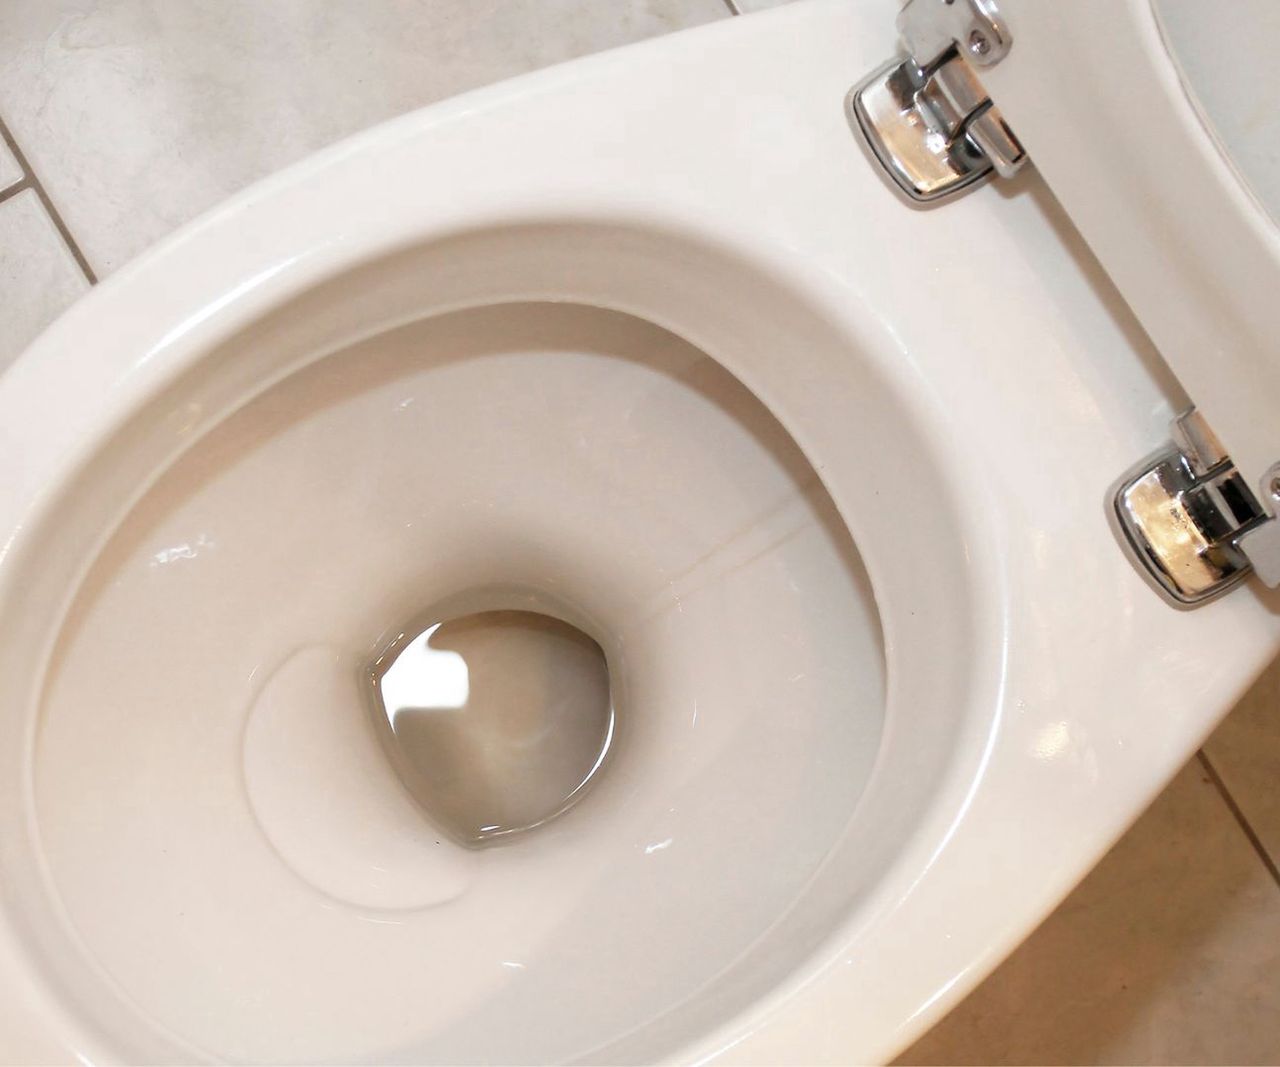 Easy and eco-friendly method to clean your toilet without scrubbing, all you need is baking soda and dish soap